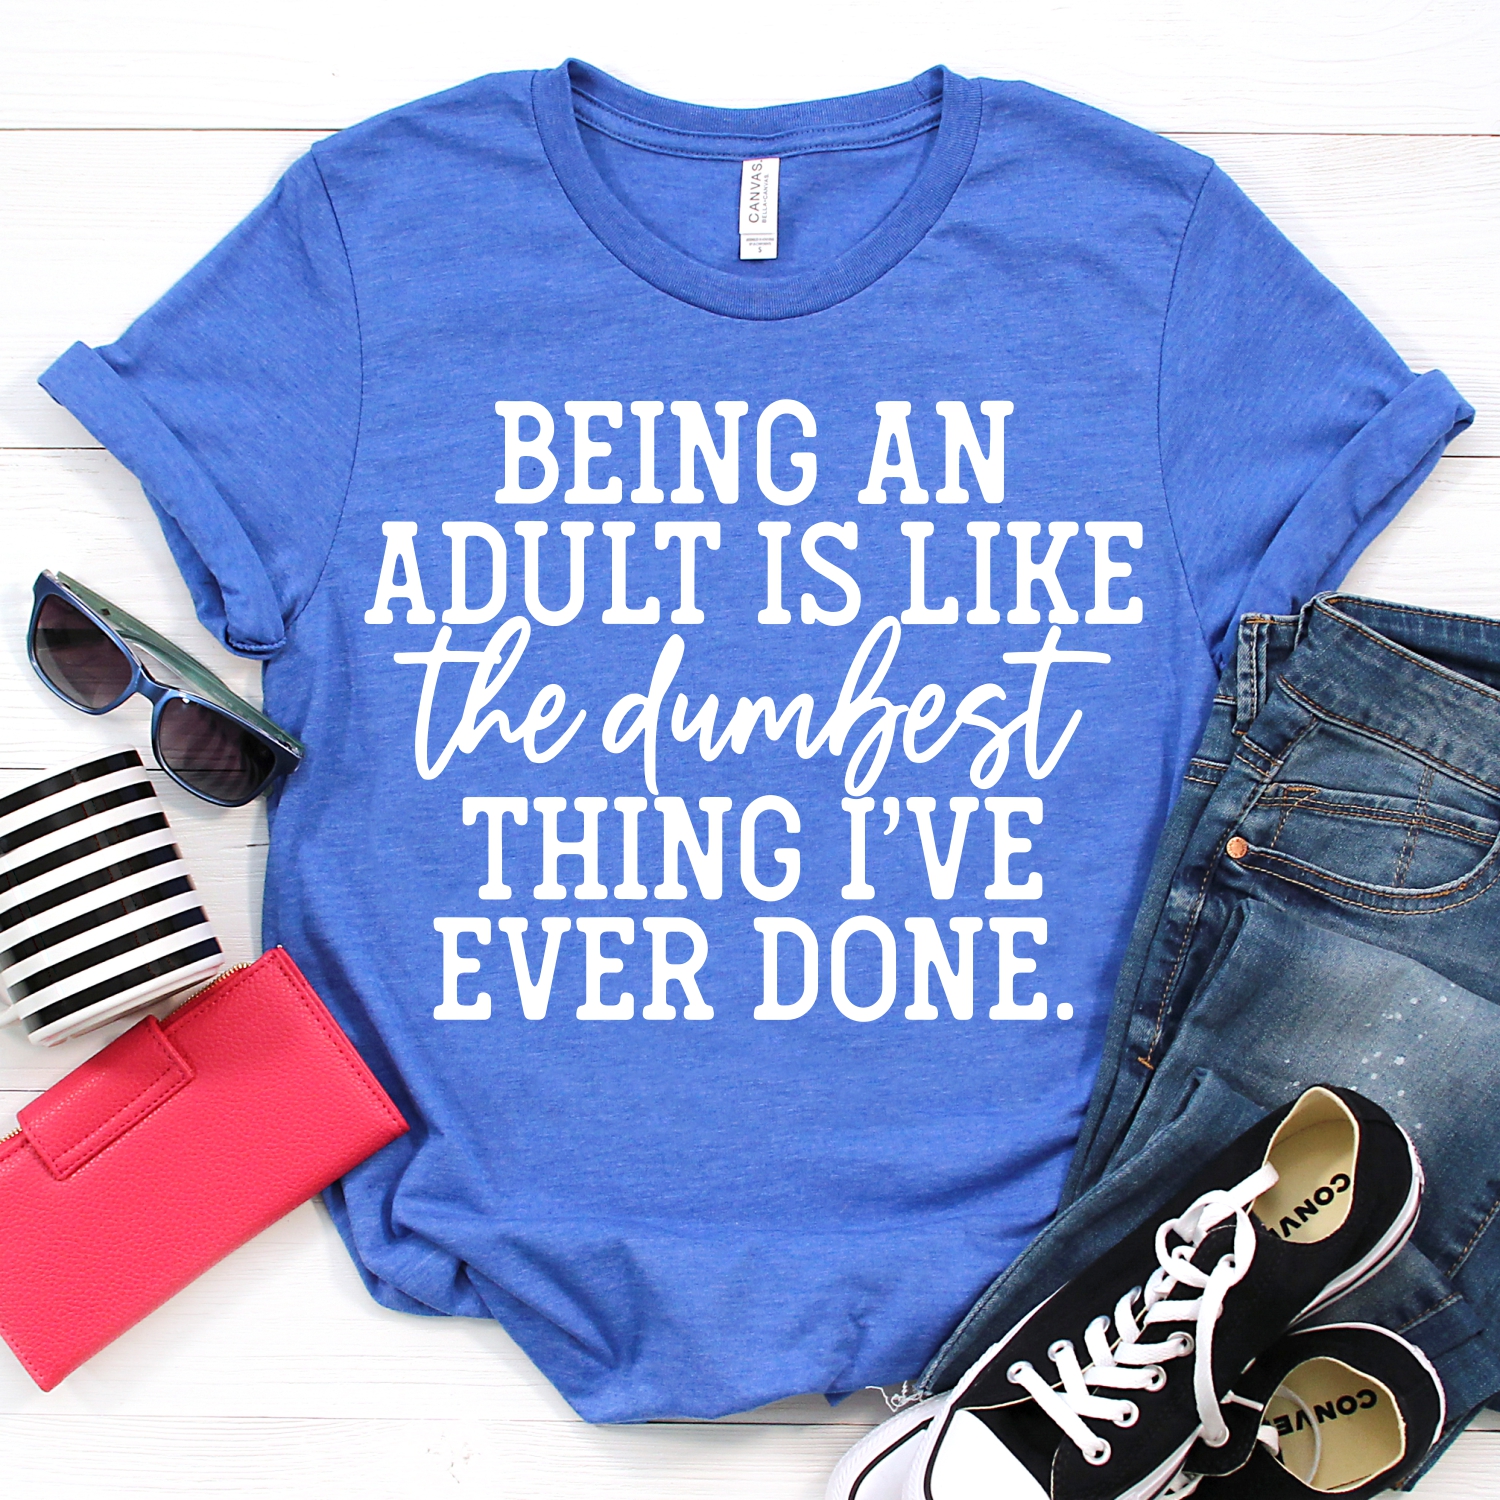 Being an adult is the dumbest thing I've ever done *ADULT* Screen Print ...